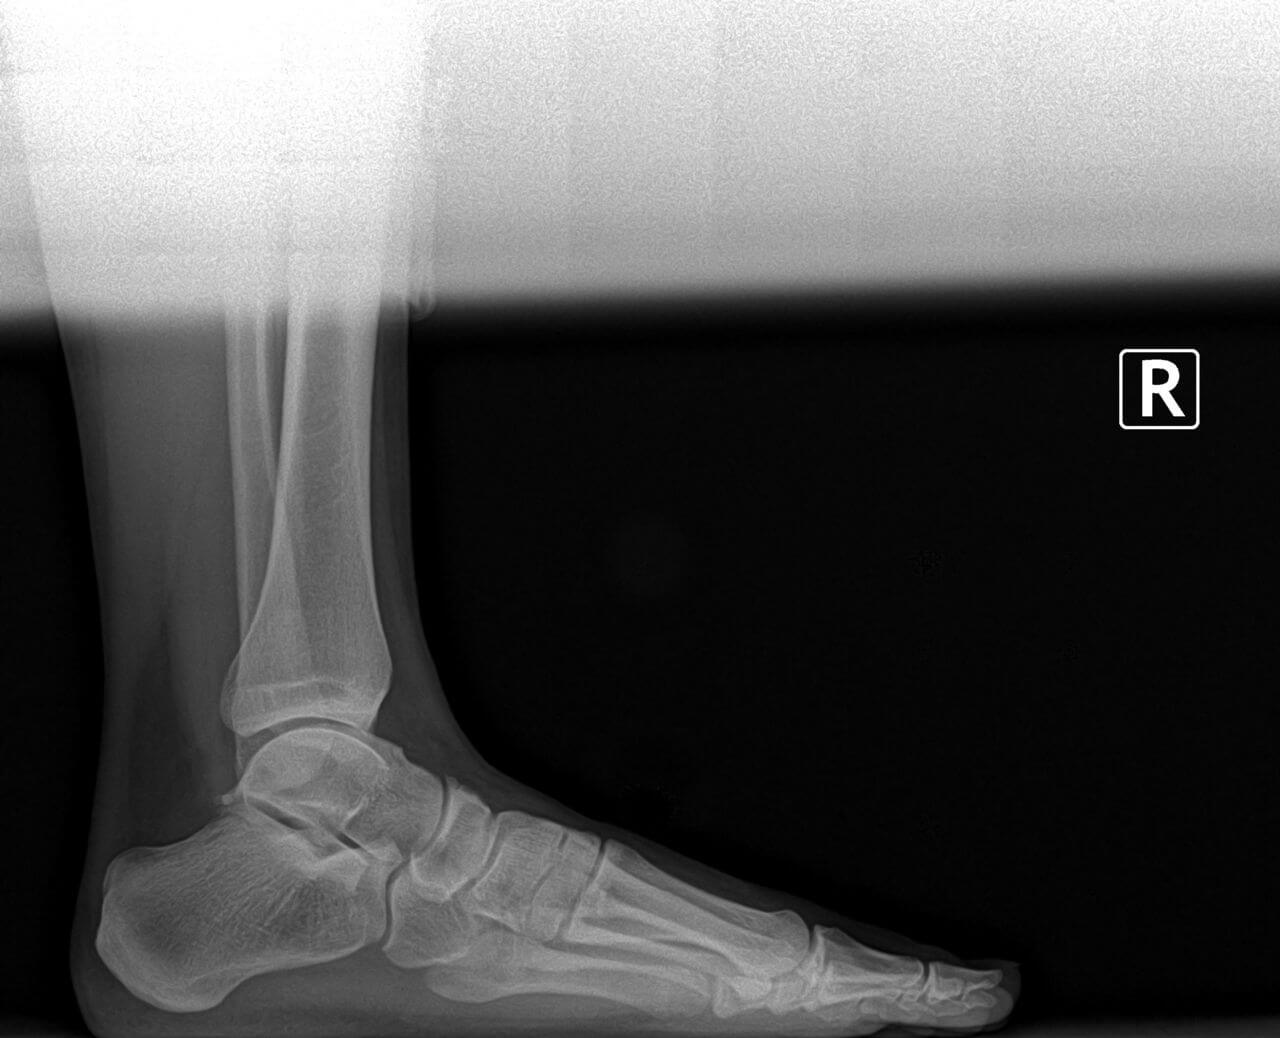 preoperative bunion and tailor's bunion